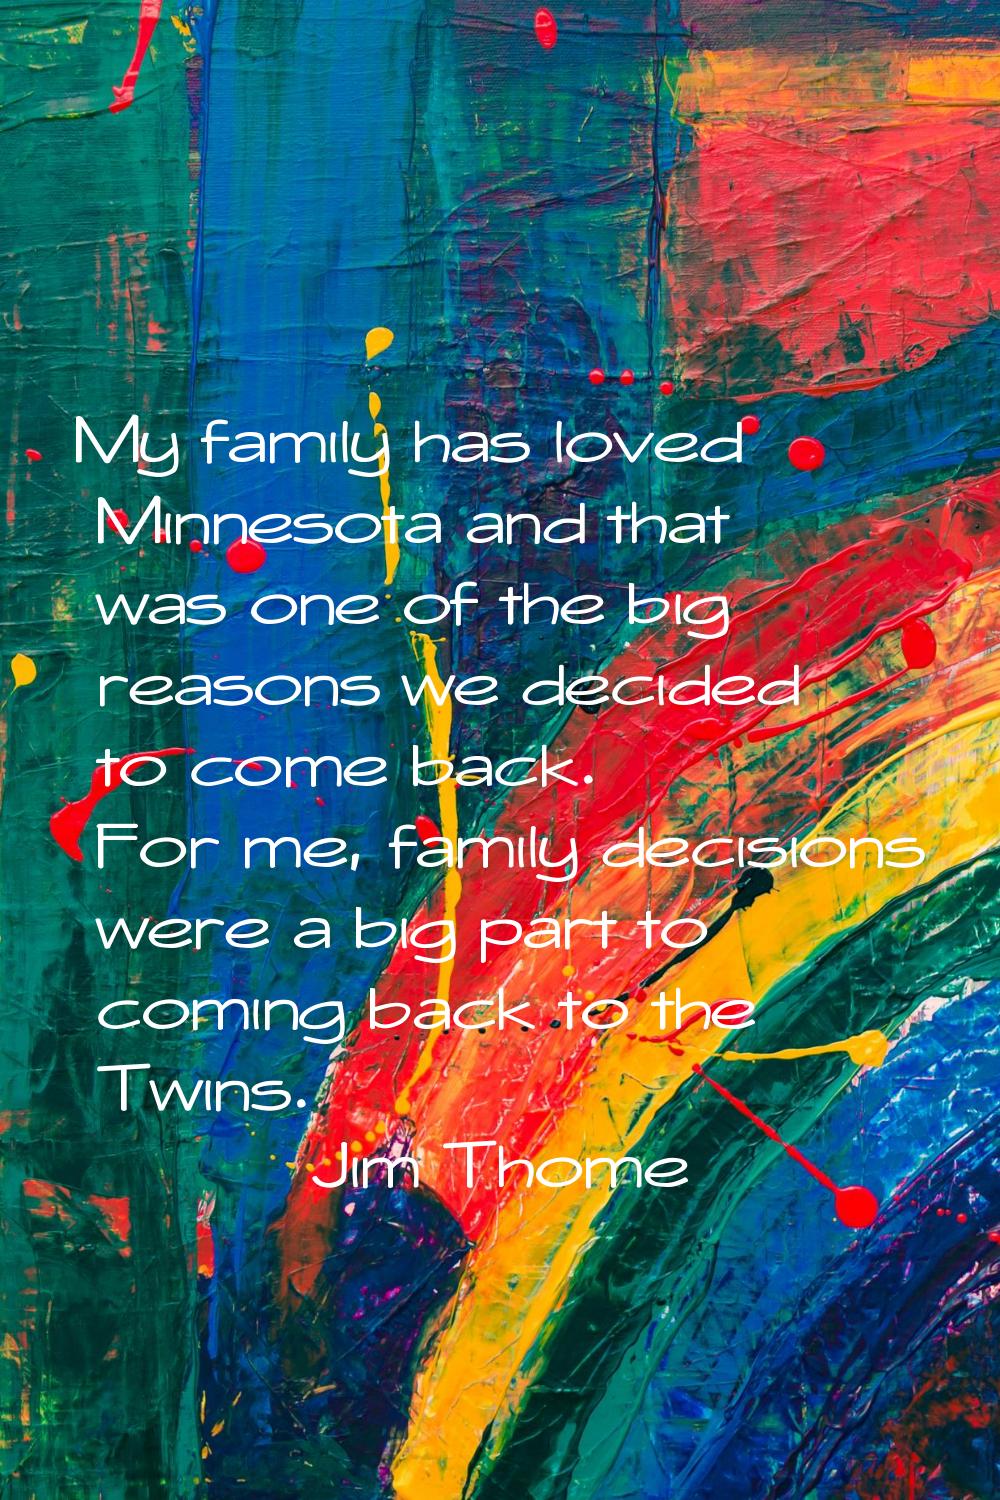 My family has loved Minnesota and that was one of the big reasons we decided to come back. For me, 